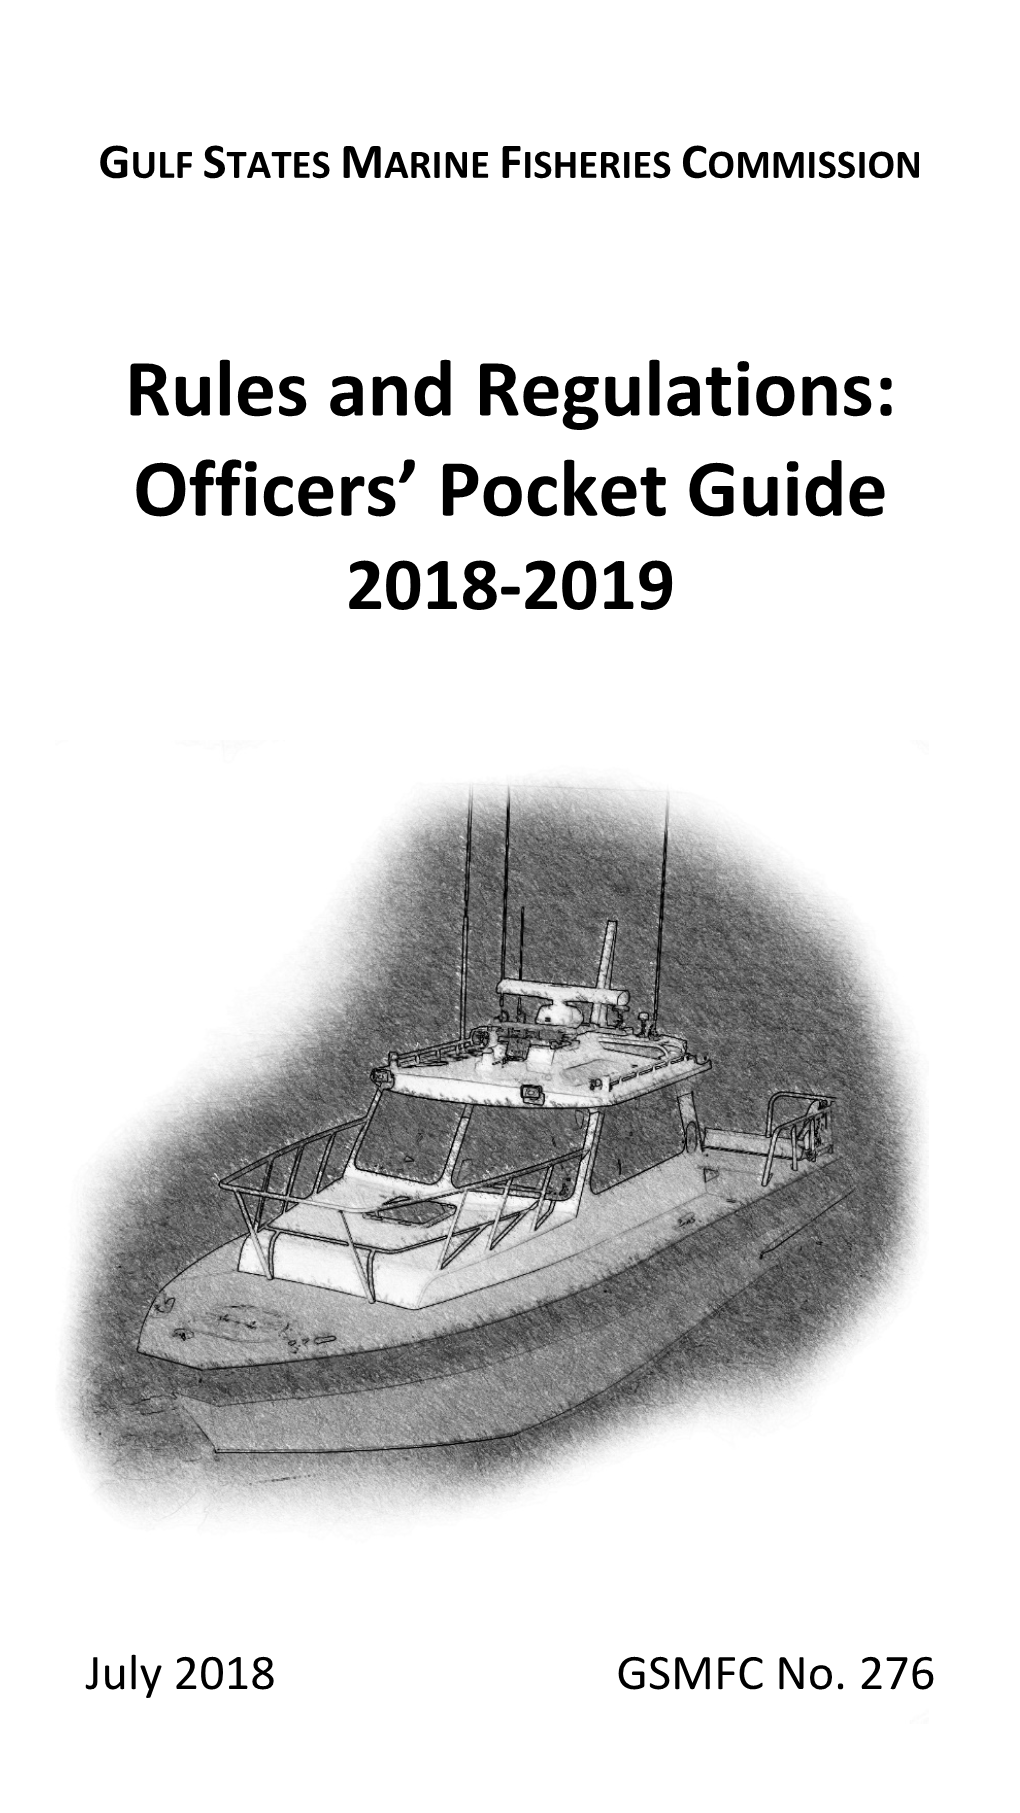 Rules and Regulations: Officers’ Pocket Guide 2018-2019